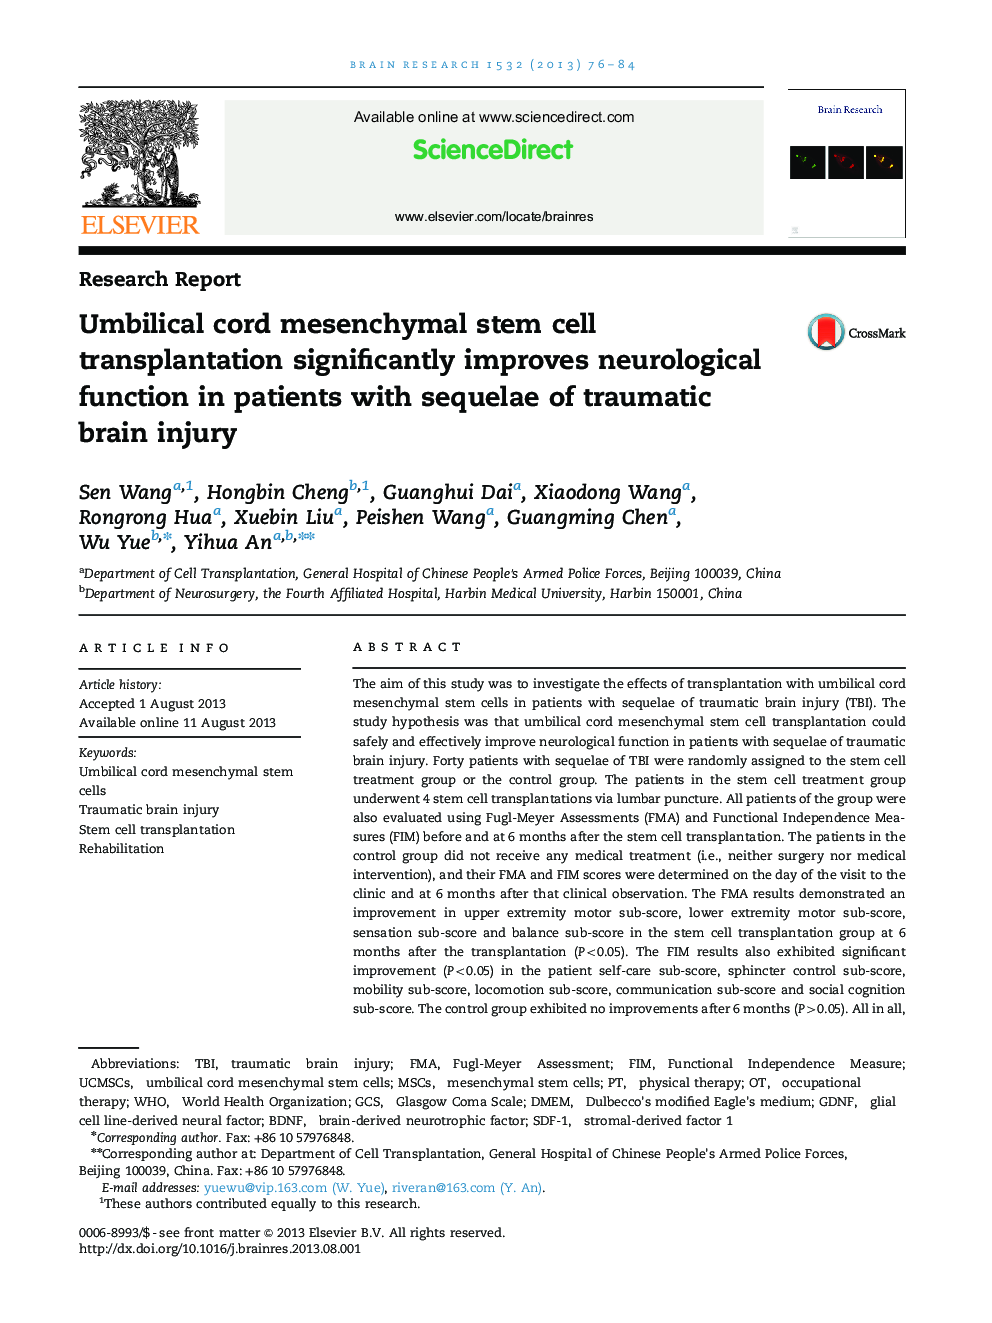 Research ReportUmbilical cord mesenchymal stem cell transplantation significantly improves neurological function in patients with sequelae of traumatic brain injury